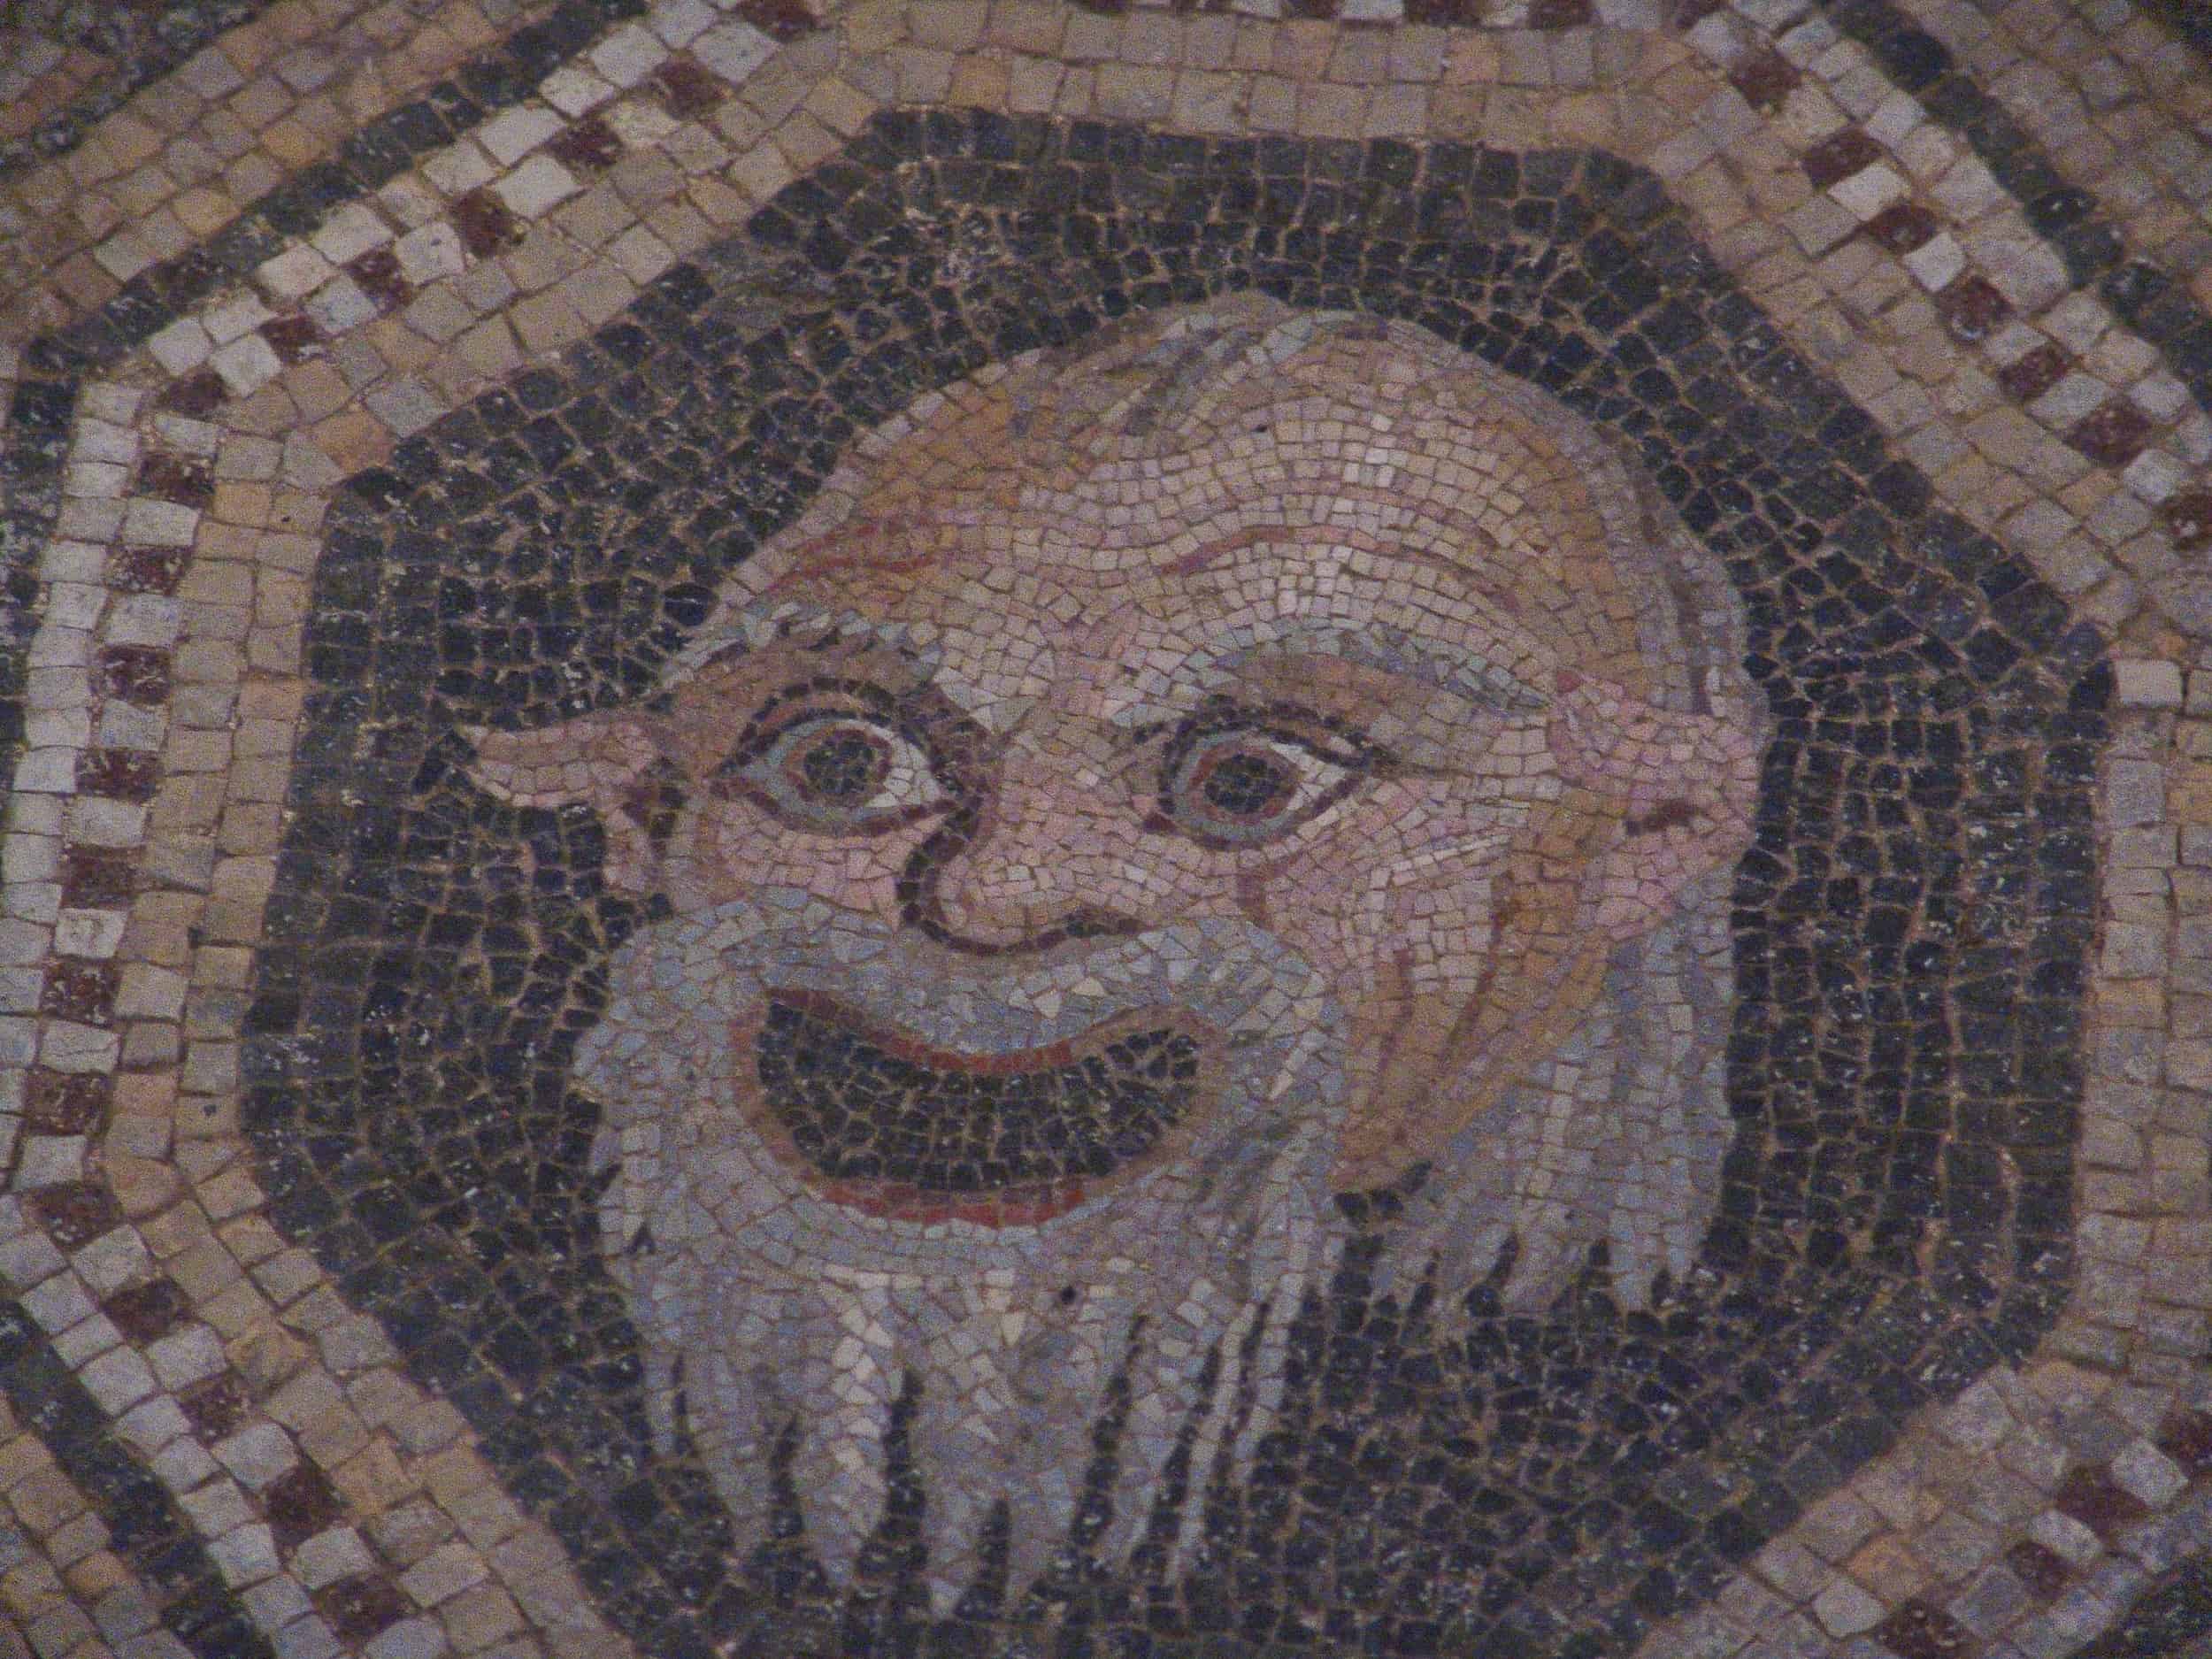 Old man on a mosaic floor of Building Z in the Lower Acropolis of Pergamon